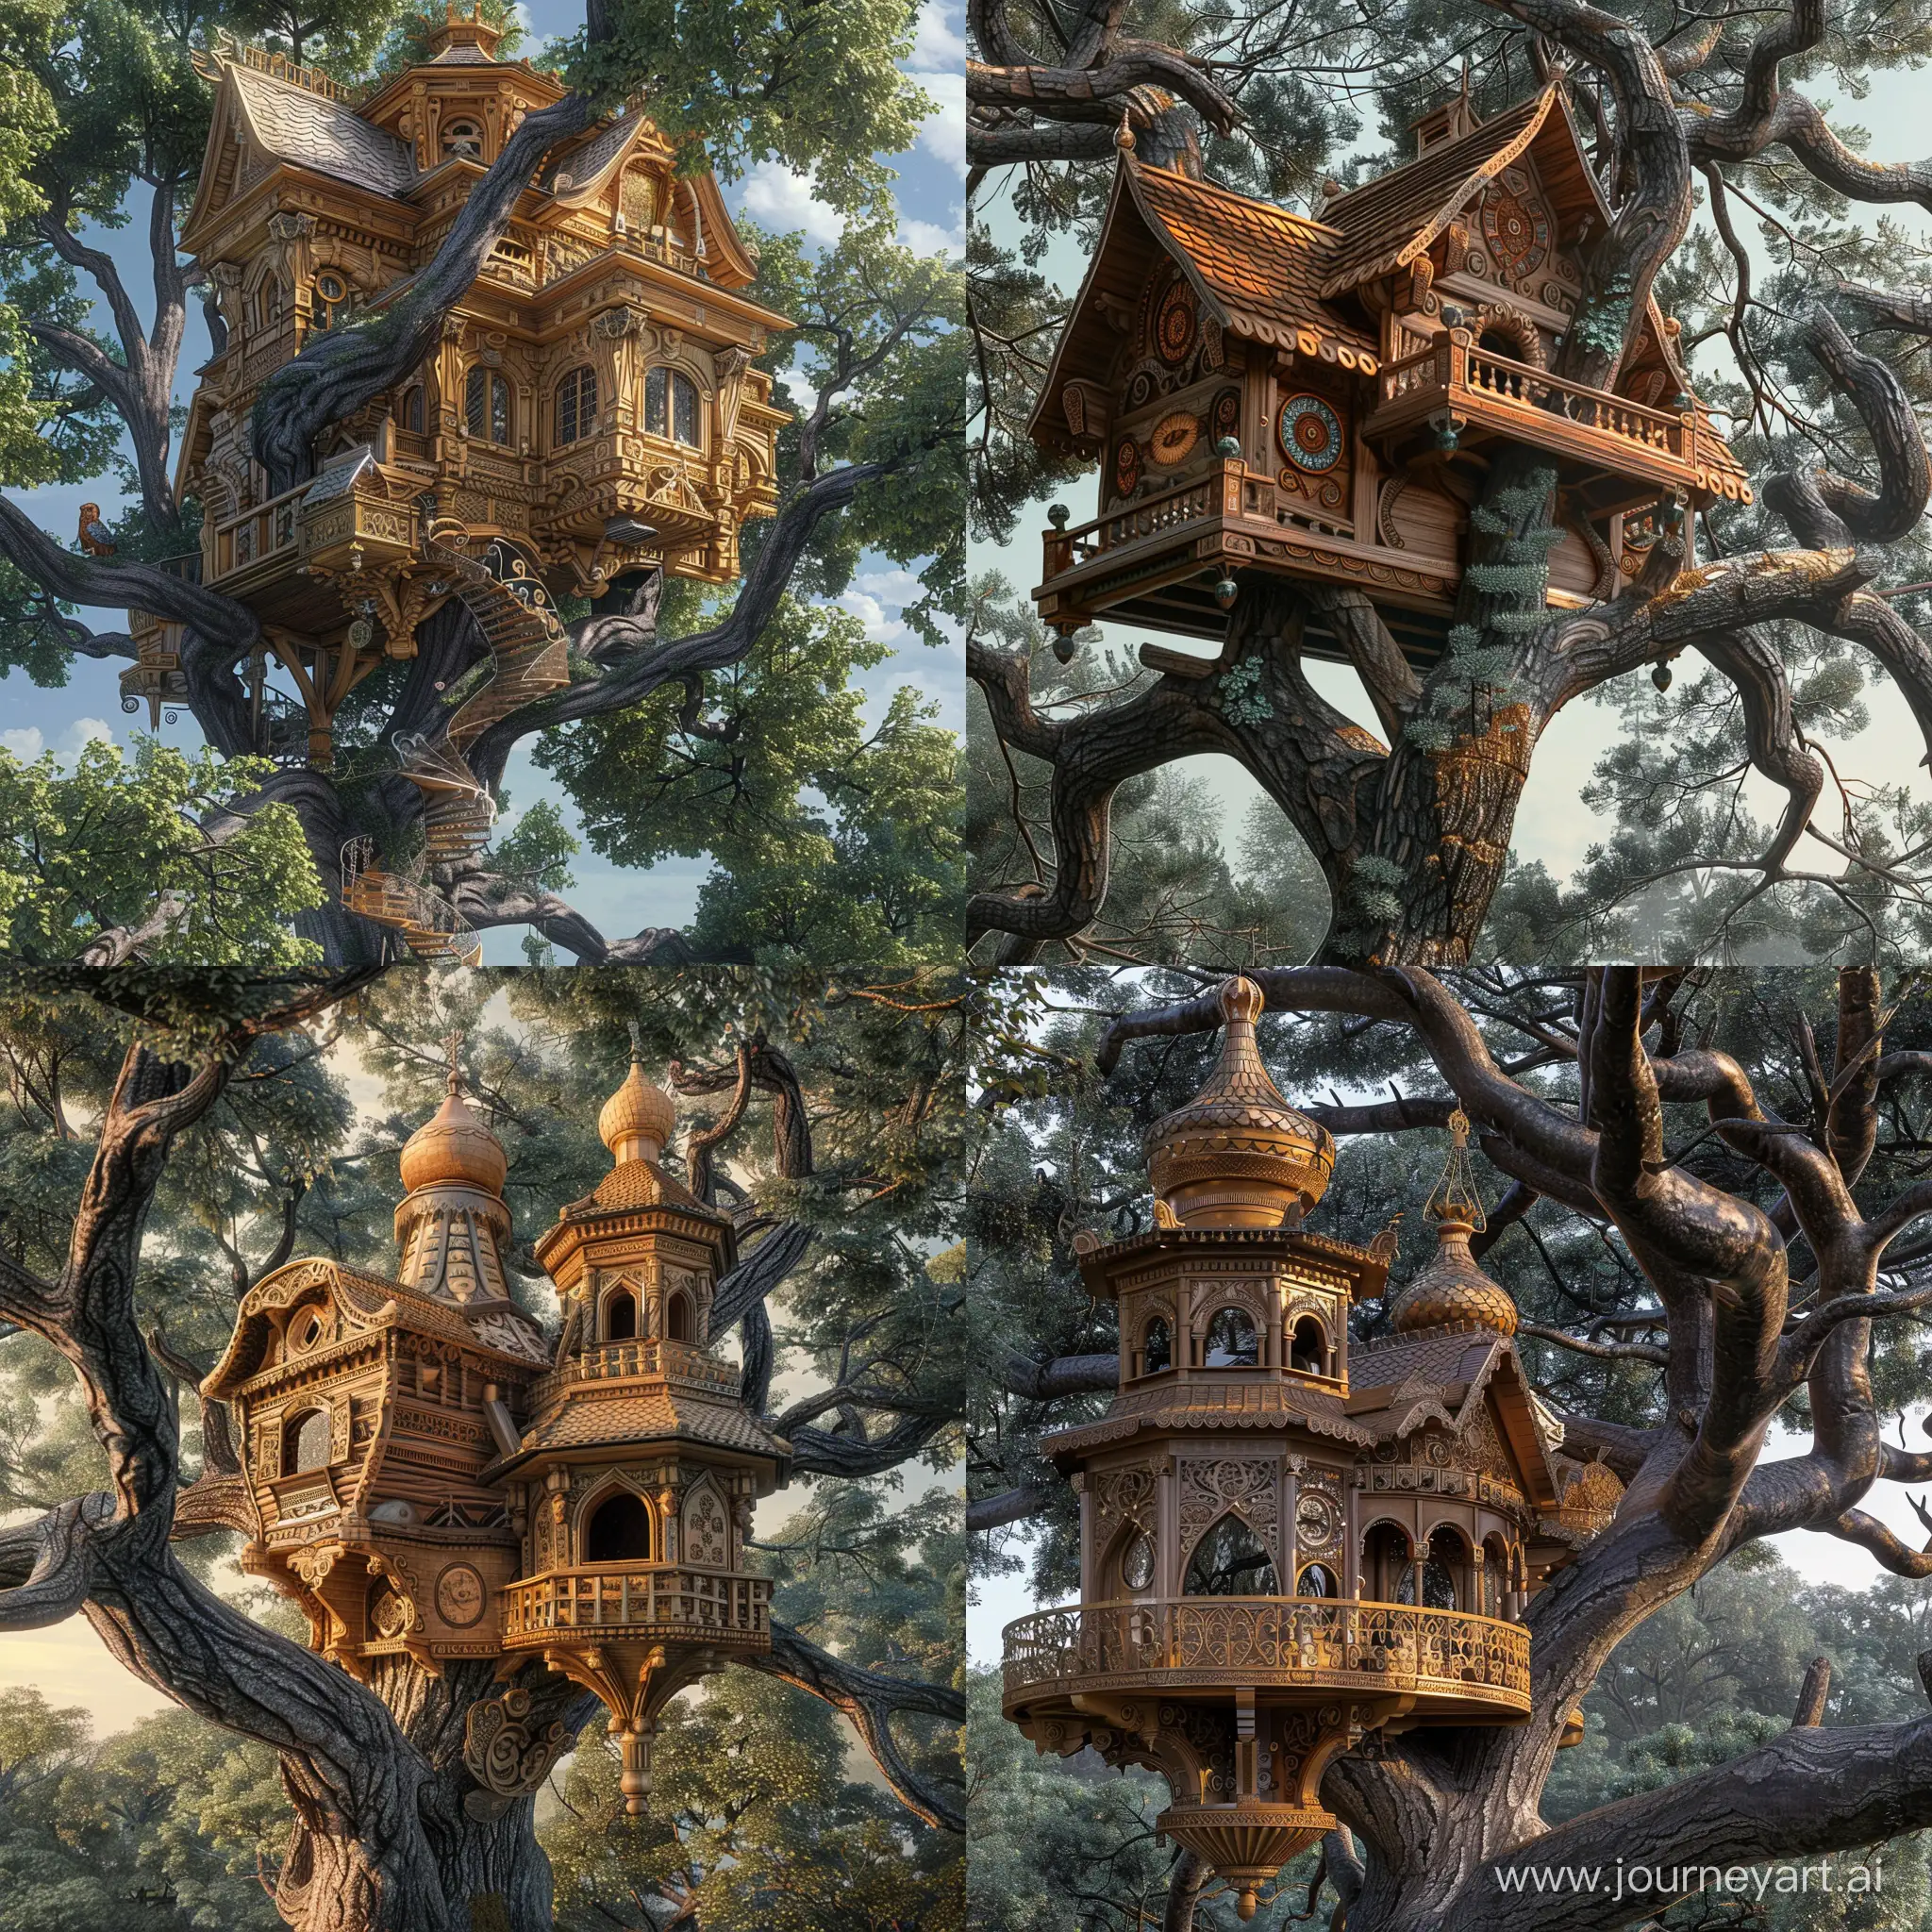 Enchanting-Ancient-Russian-Wooden-Birdhouse-Amidst-Towering-Tree-Branches